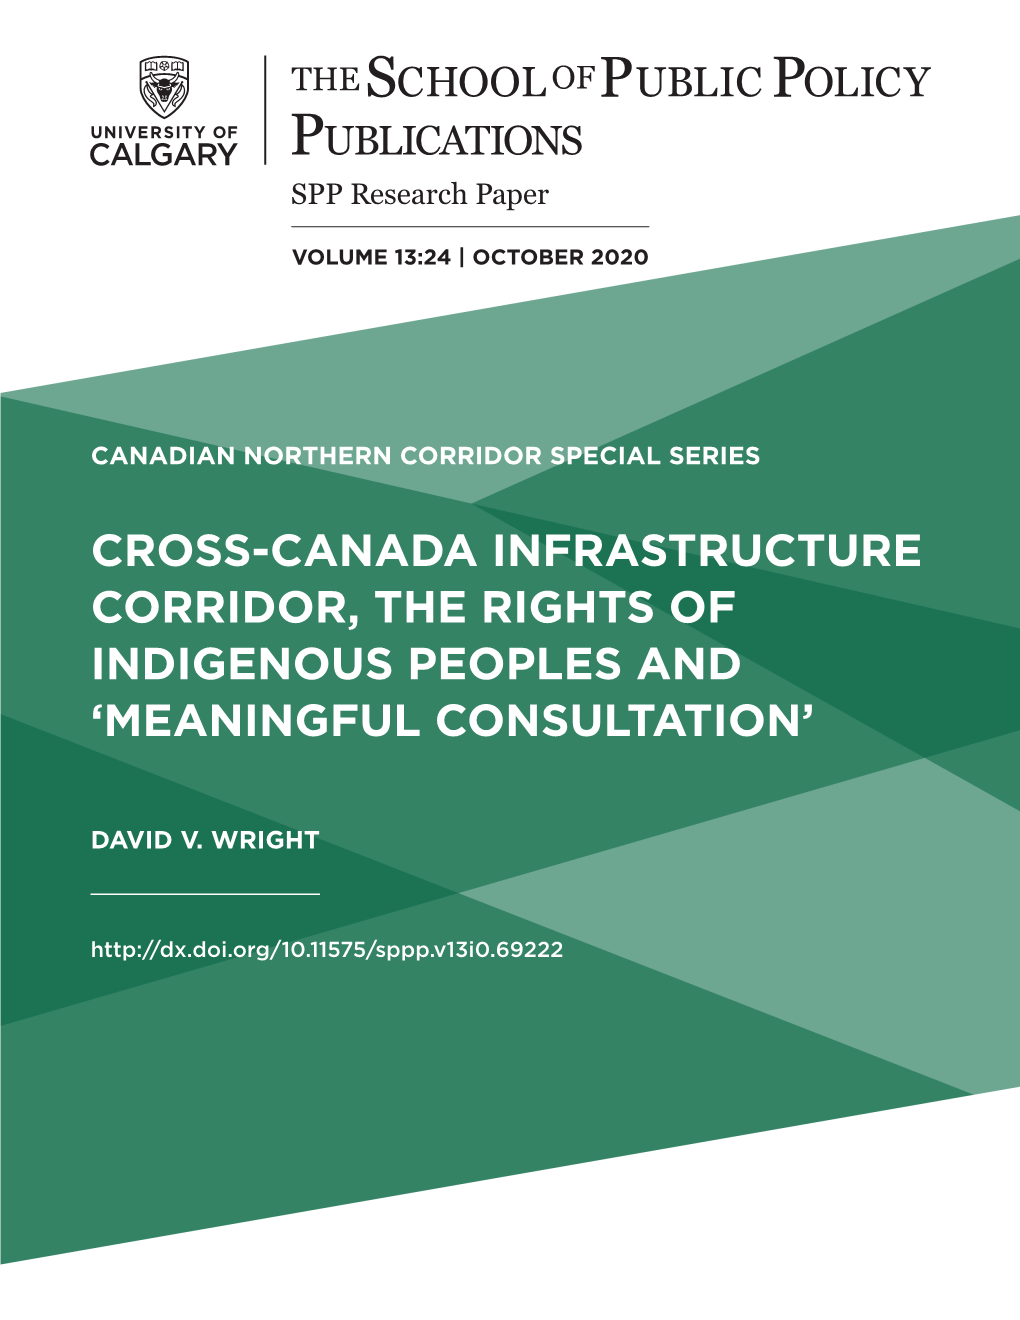 Cross-Canada Infrastructure Corridor, the Rights of Indigenous Peoples and ‘Meaningful Consultation’